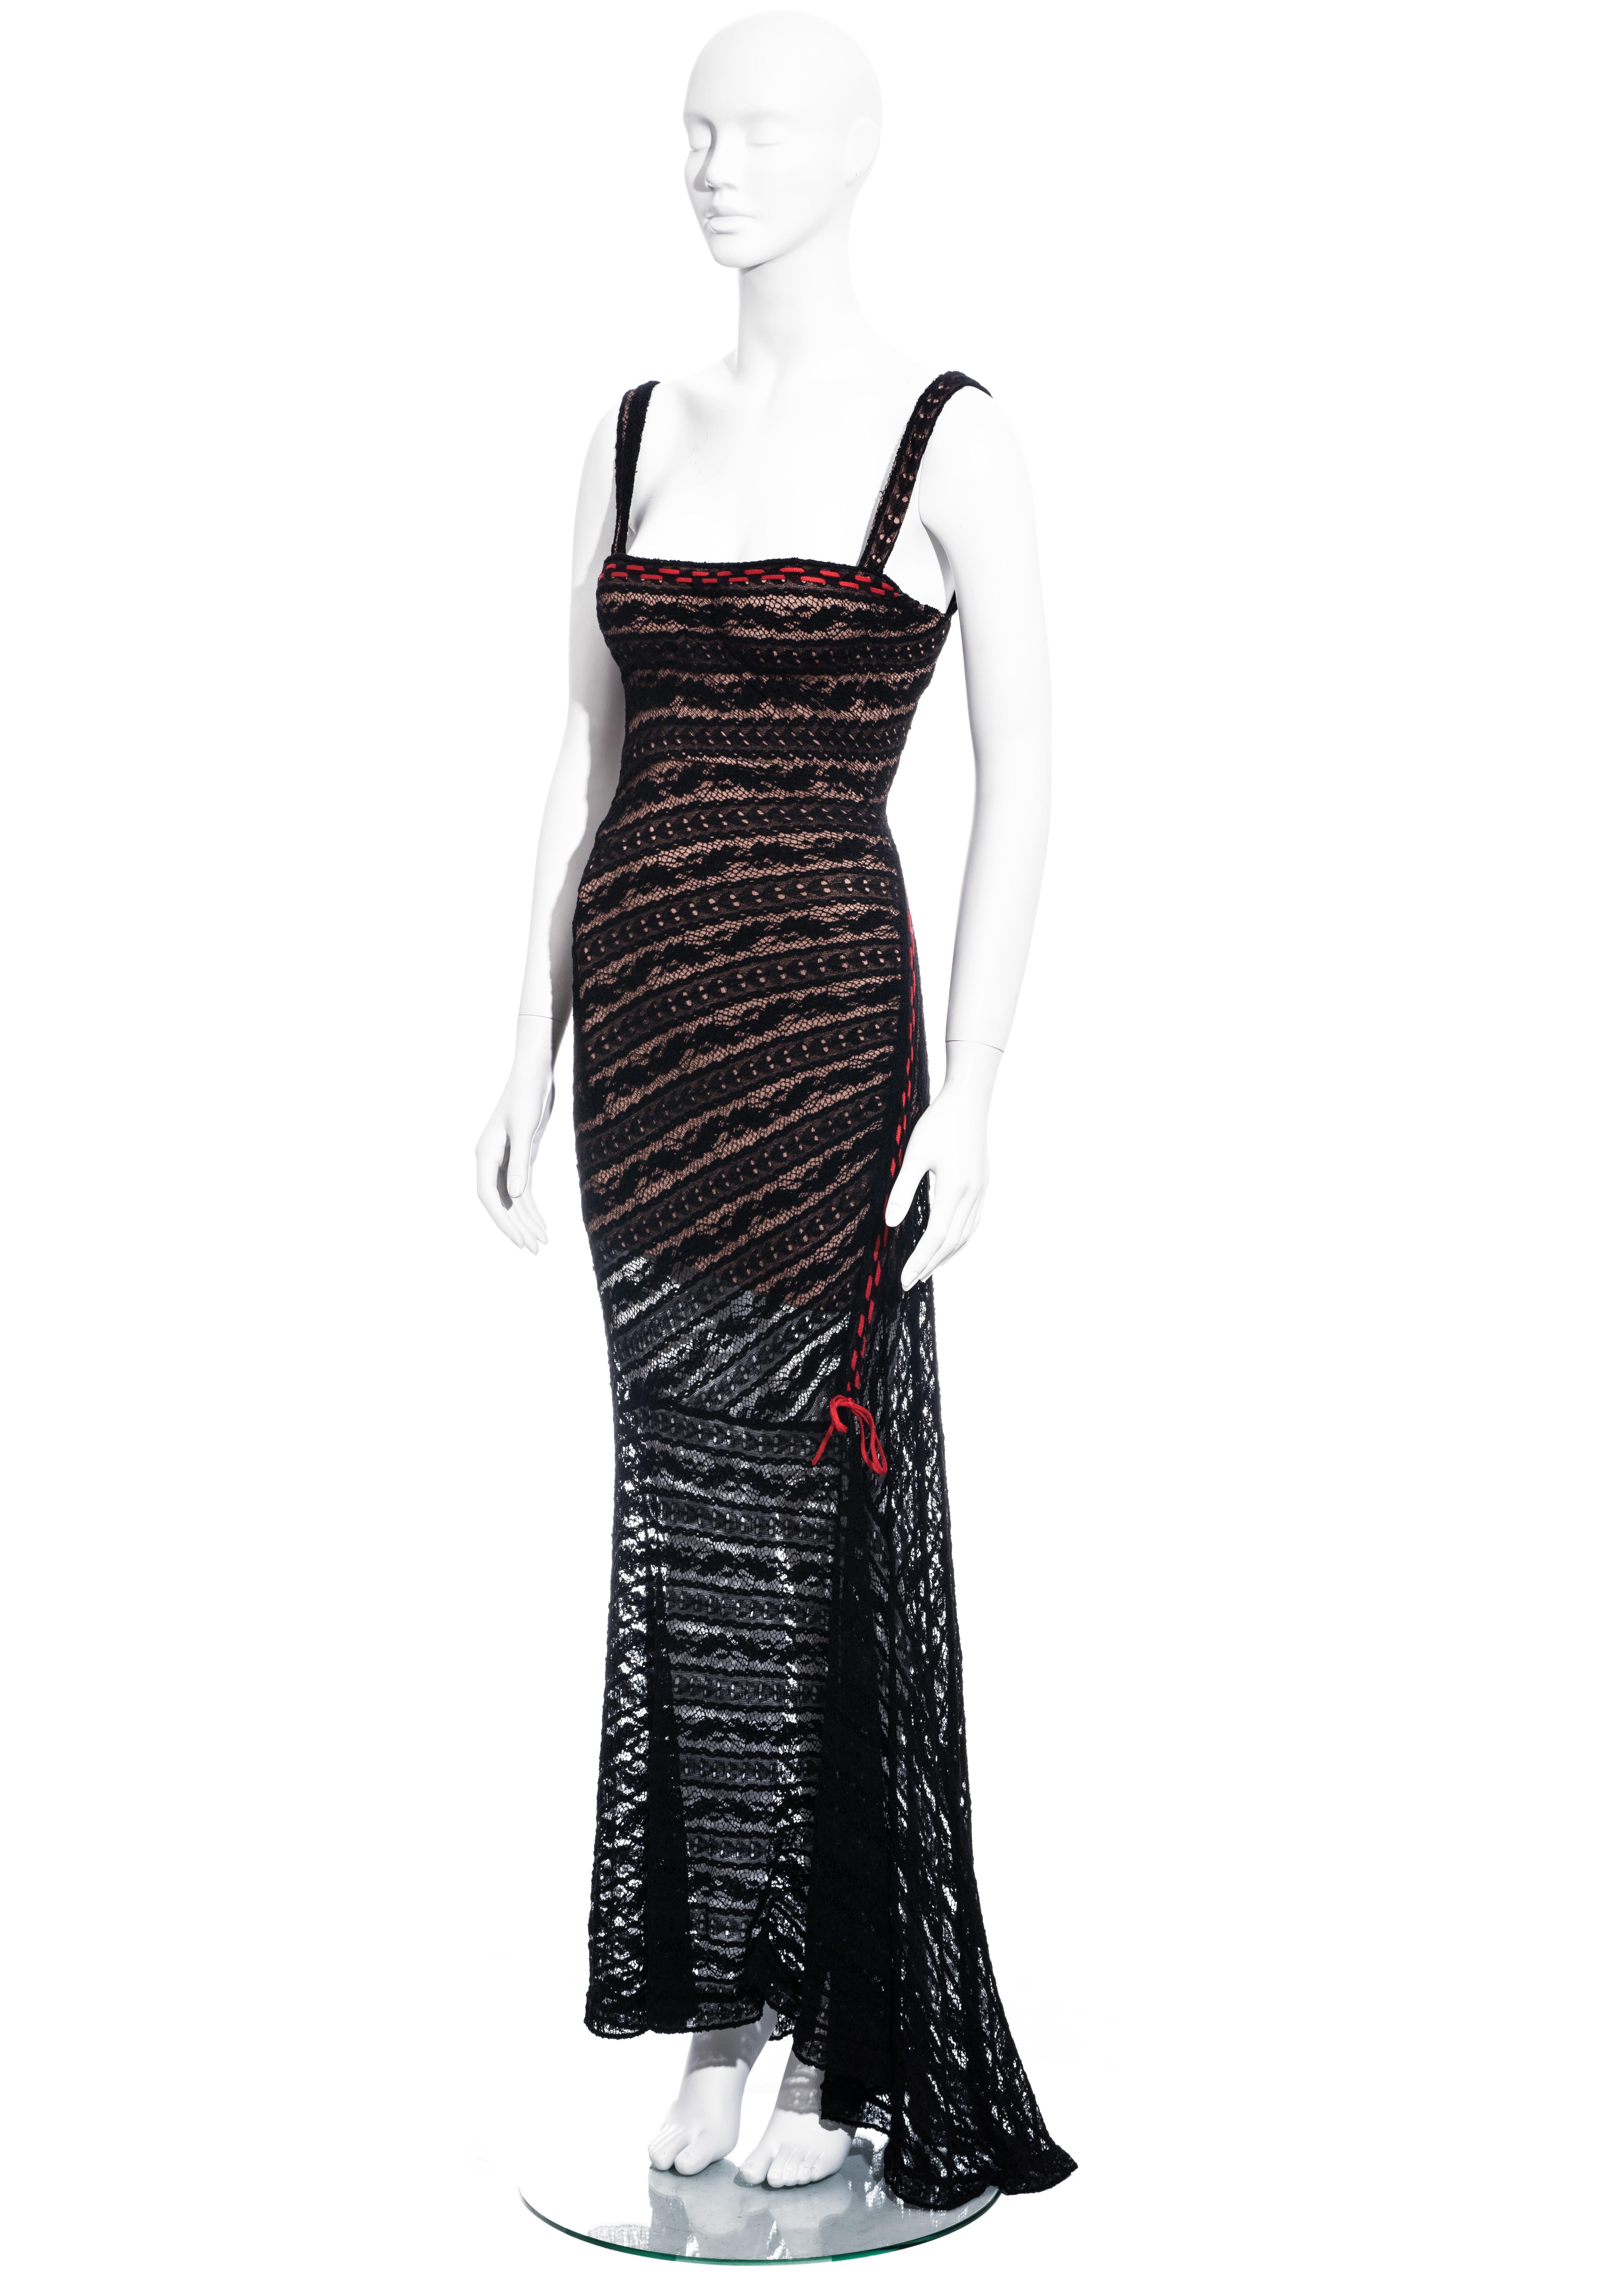 ▪ Azzedine Alaia black patterned lace evening dress
▪ 85% Viscose, 10% Nylon, 5% Cotton
▪ Built-in underwired padded bra 
▪ Nude underdress 
▪ Red string detail 
▪ FR 36 - UK 8 - US 4
▪ Fall-Winter 1993 